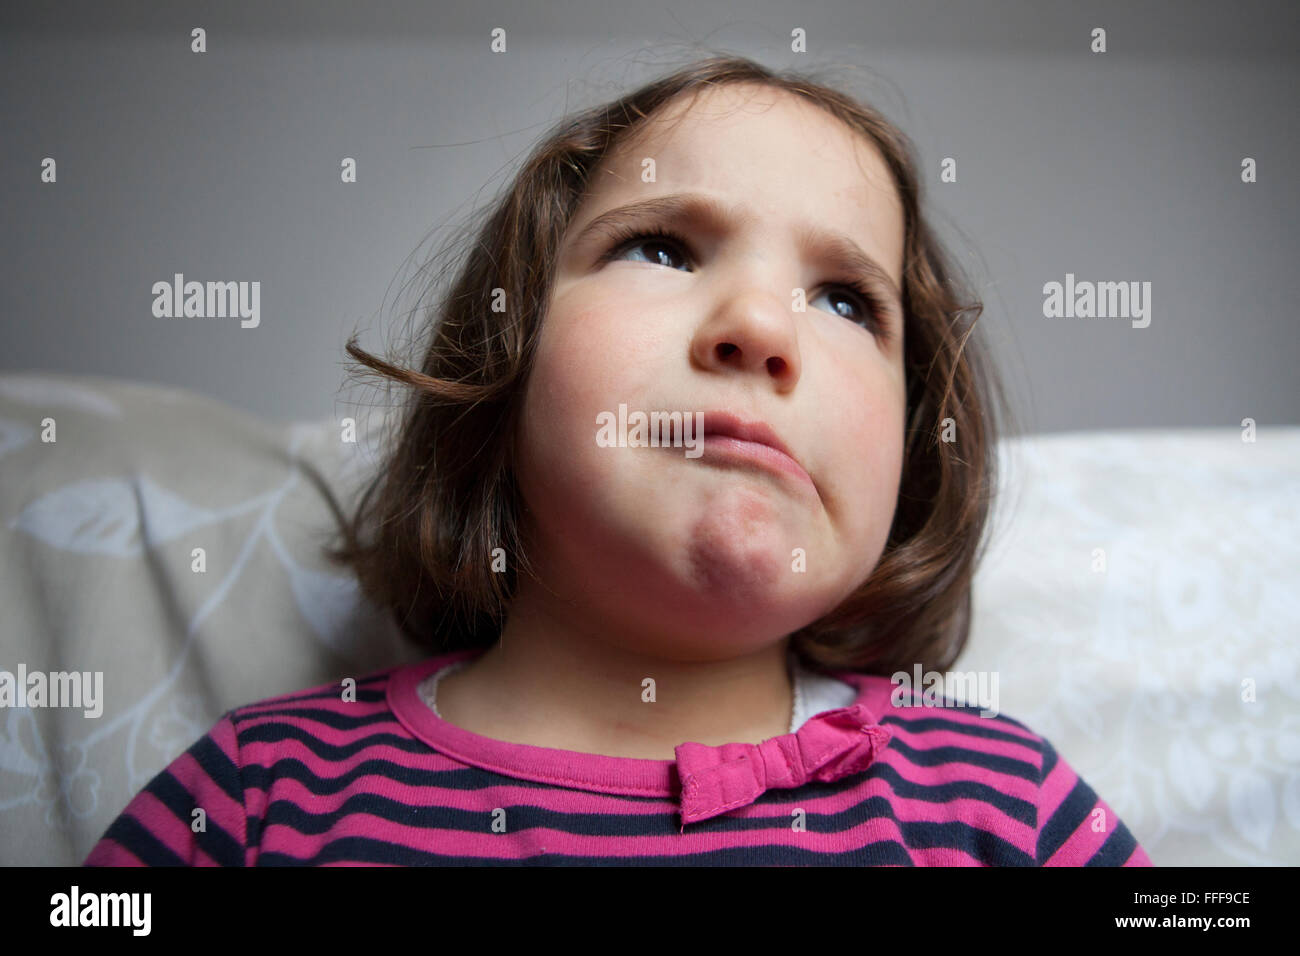 Three years old little girl portrait with crazy expression. Indoors portrait Stock Photo